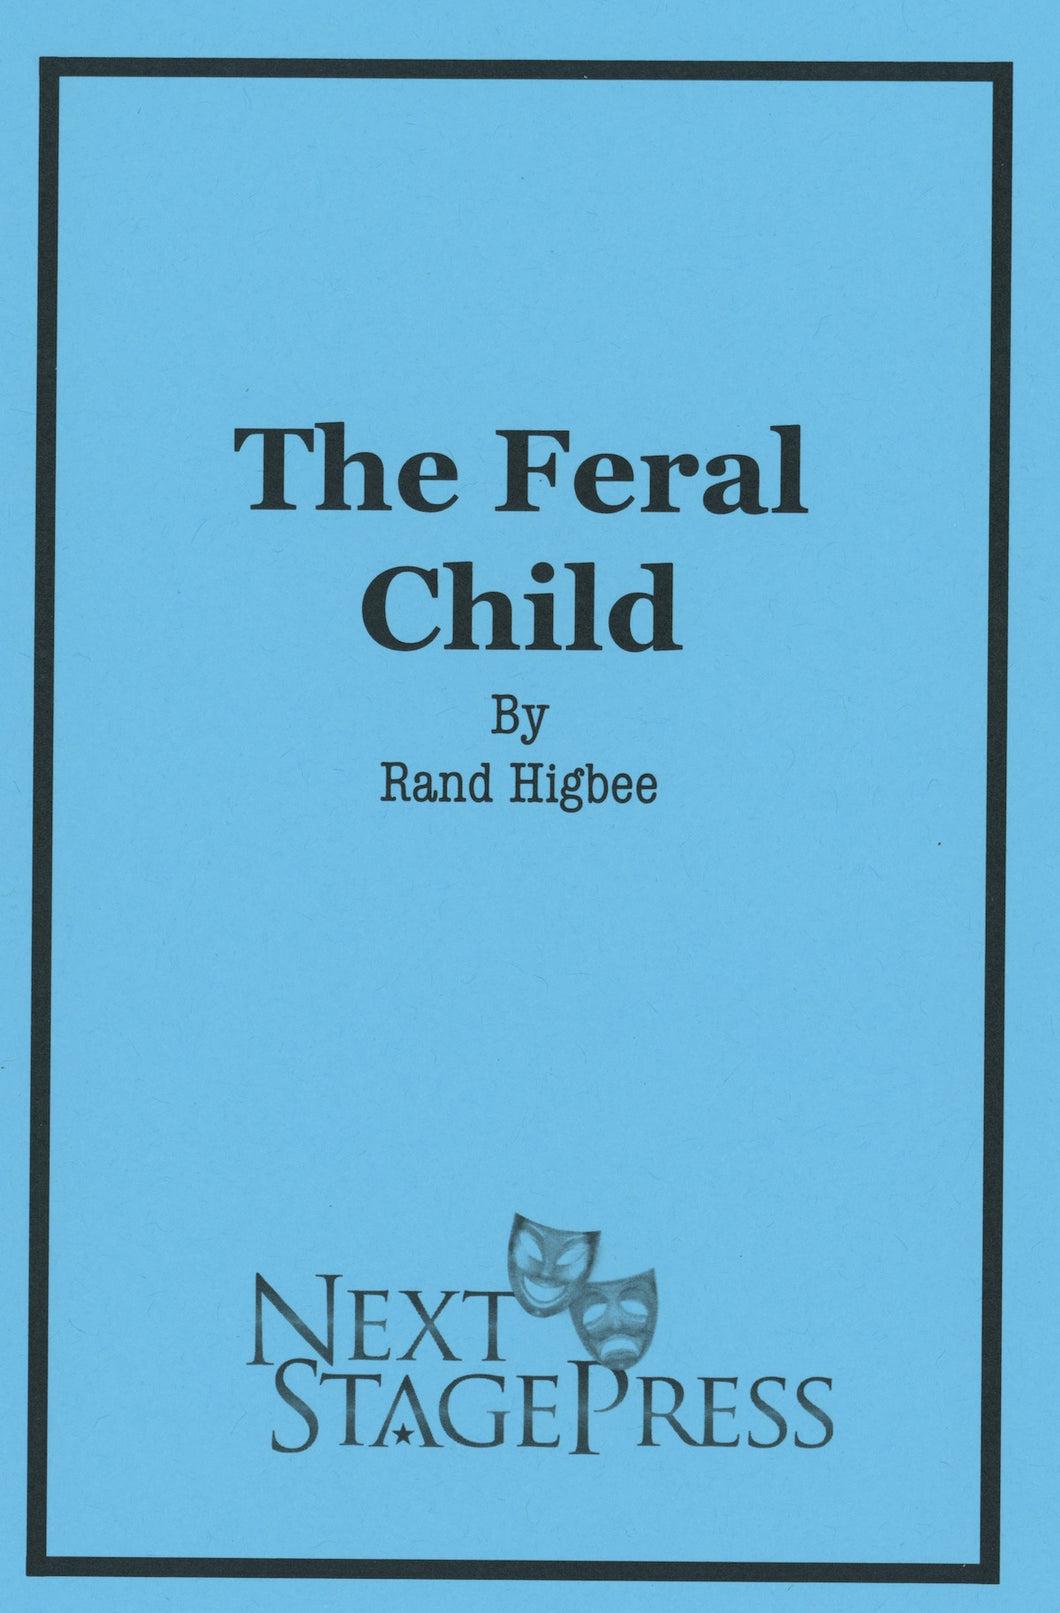 THE FERAL CHILD by Rand Higbee